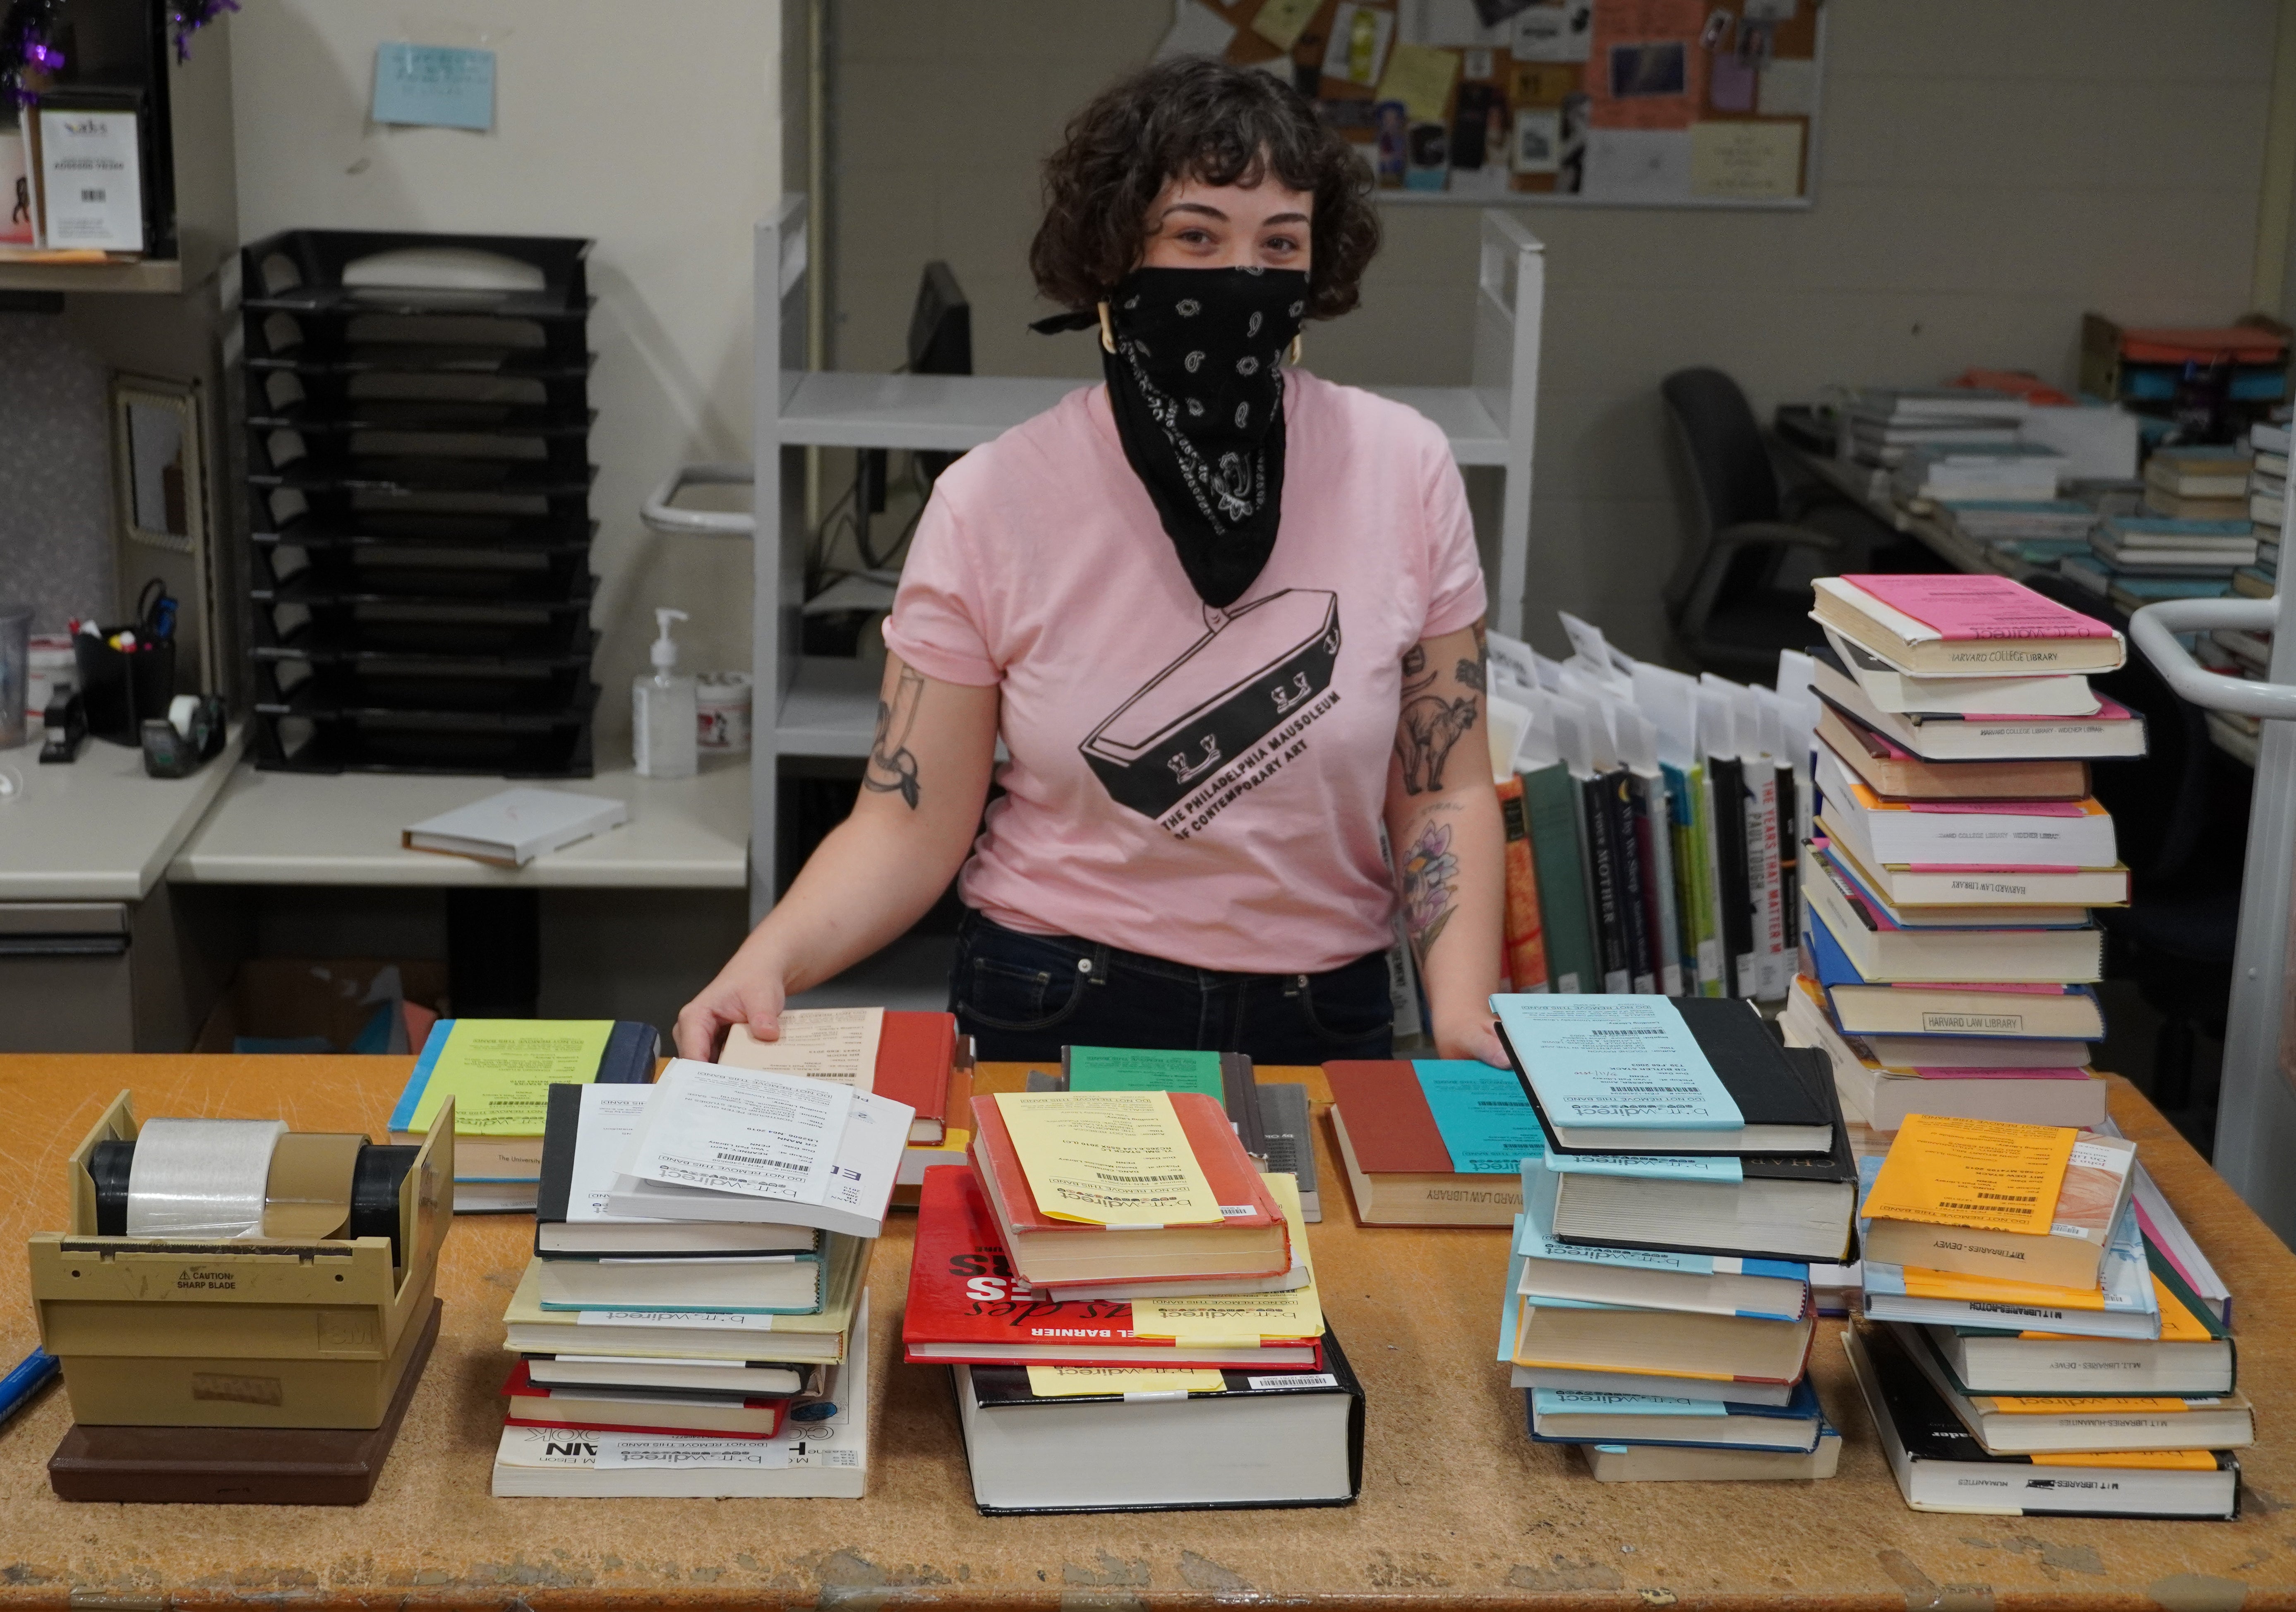 A librarian wearing mask is arranging books on a table.